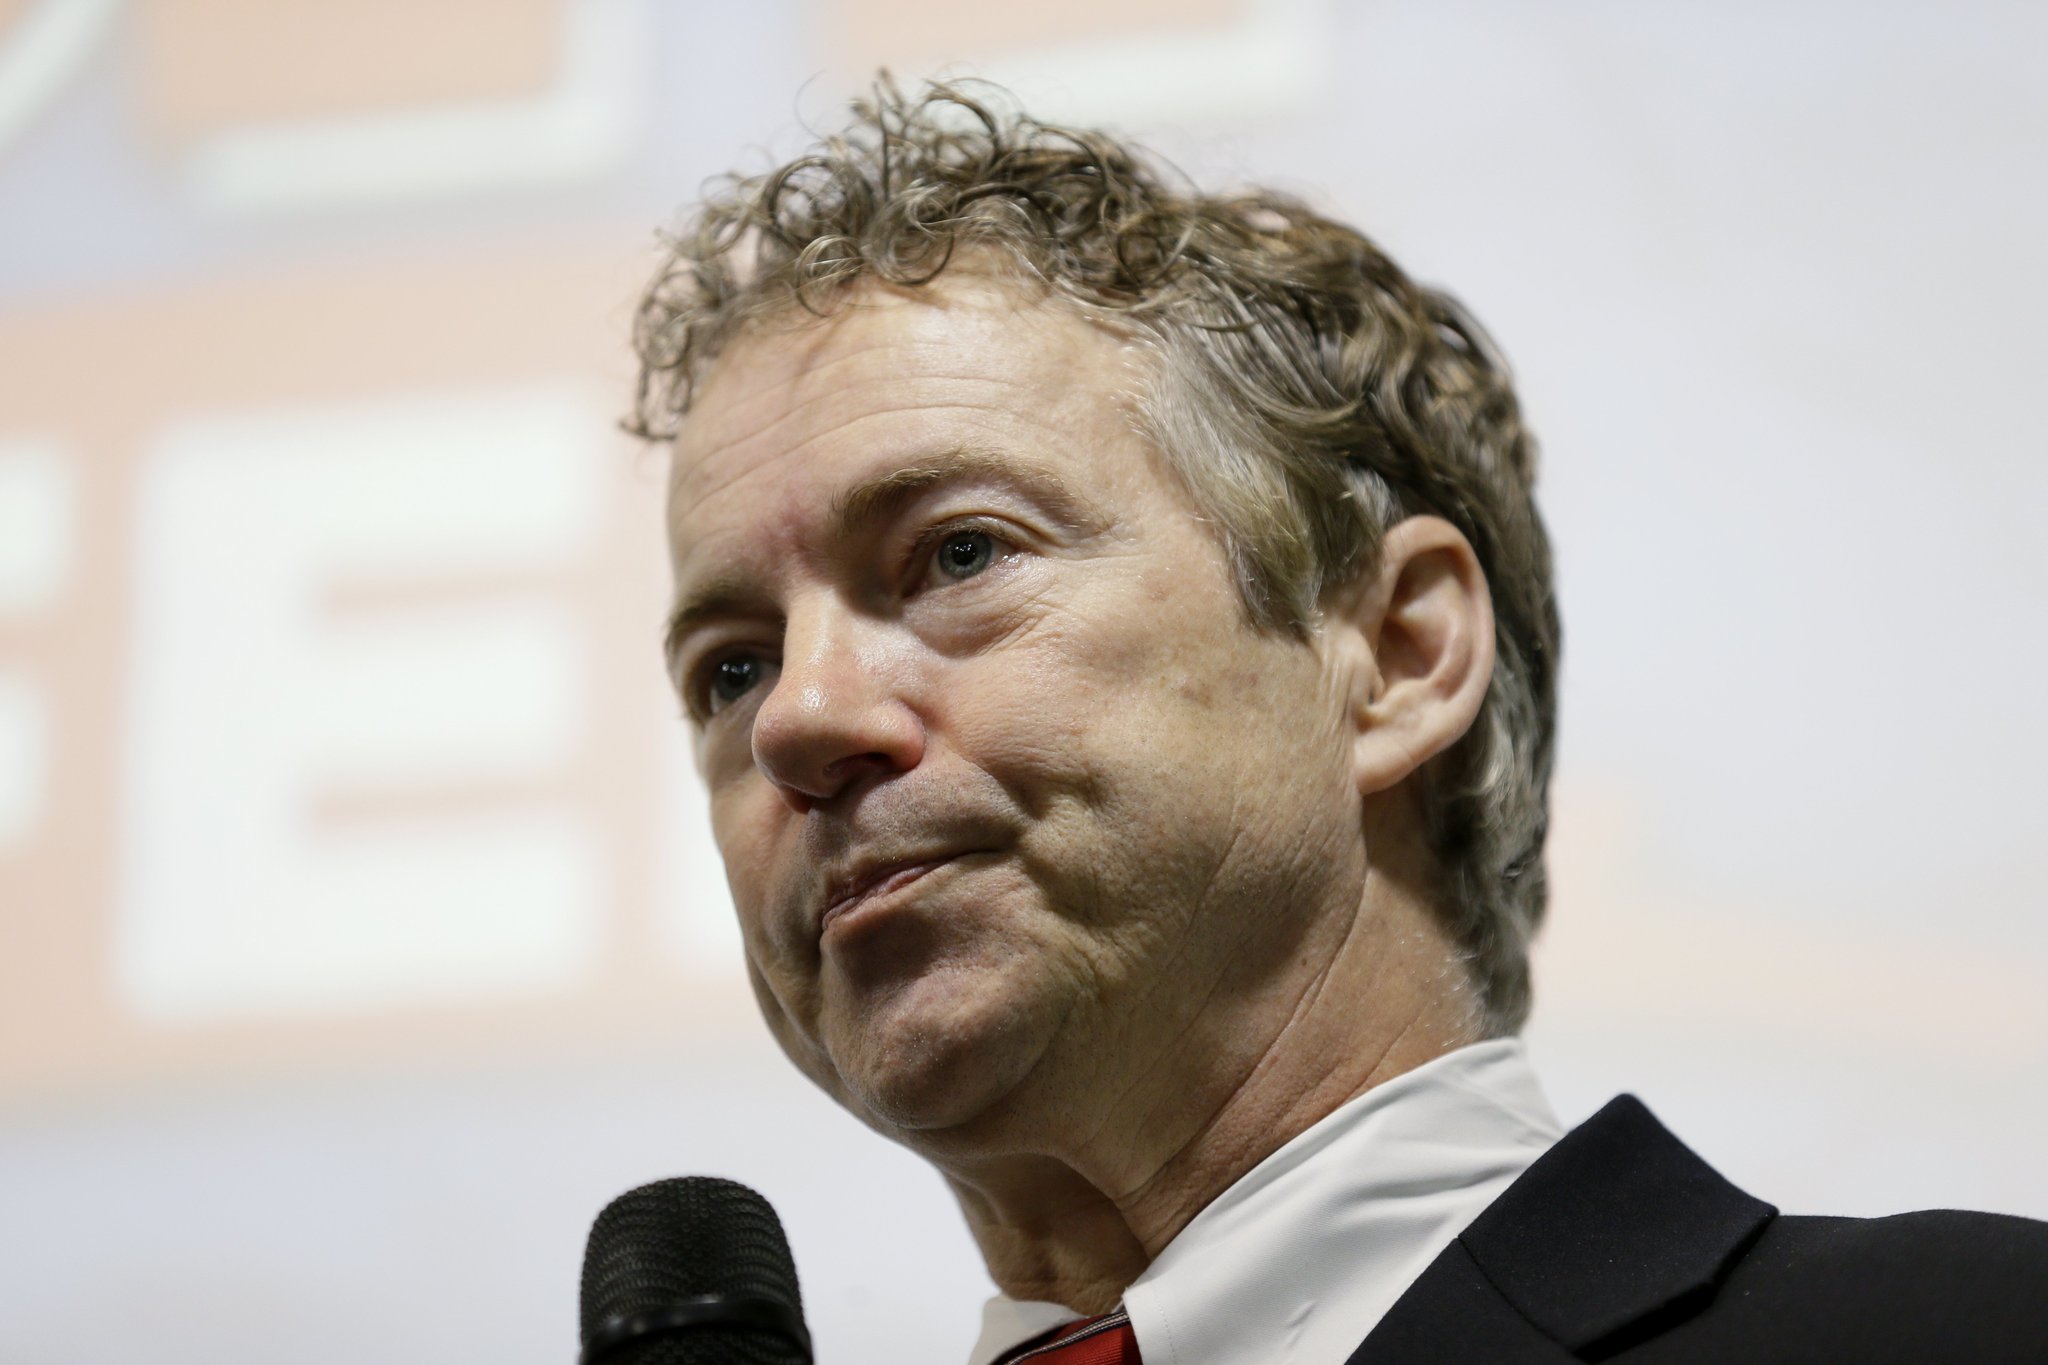 Rand Paul irritated by vaccine questions - LA Times2048 x 1365